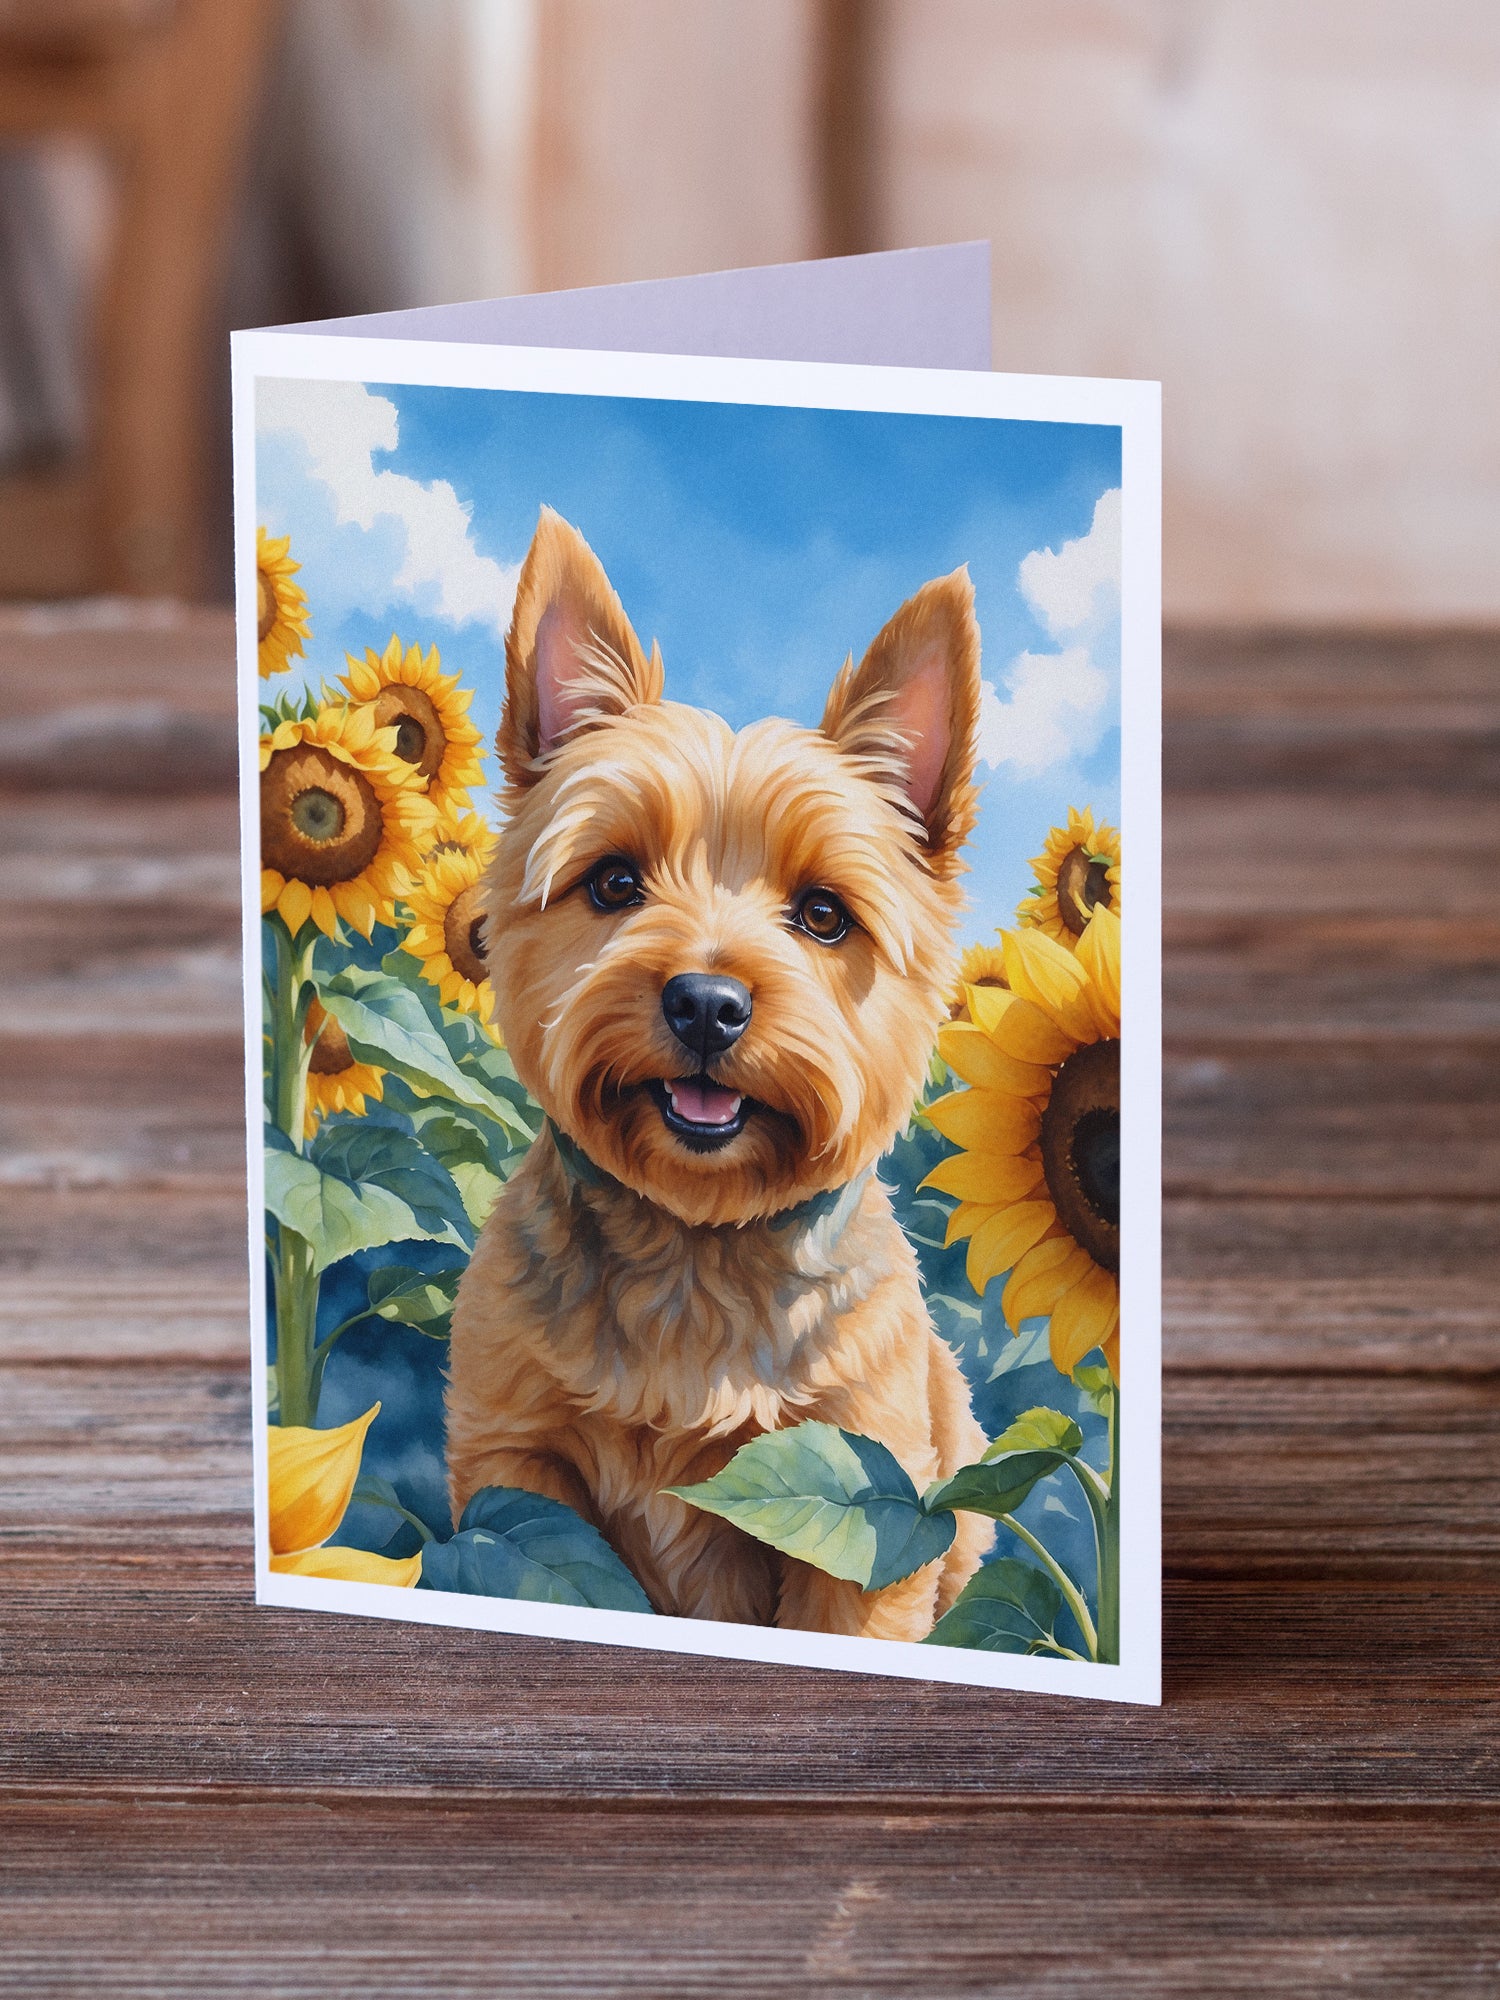 Buy this Norwich Terrier in Sunflowers Greeting Cards Pack of 8